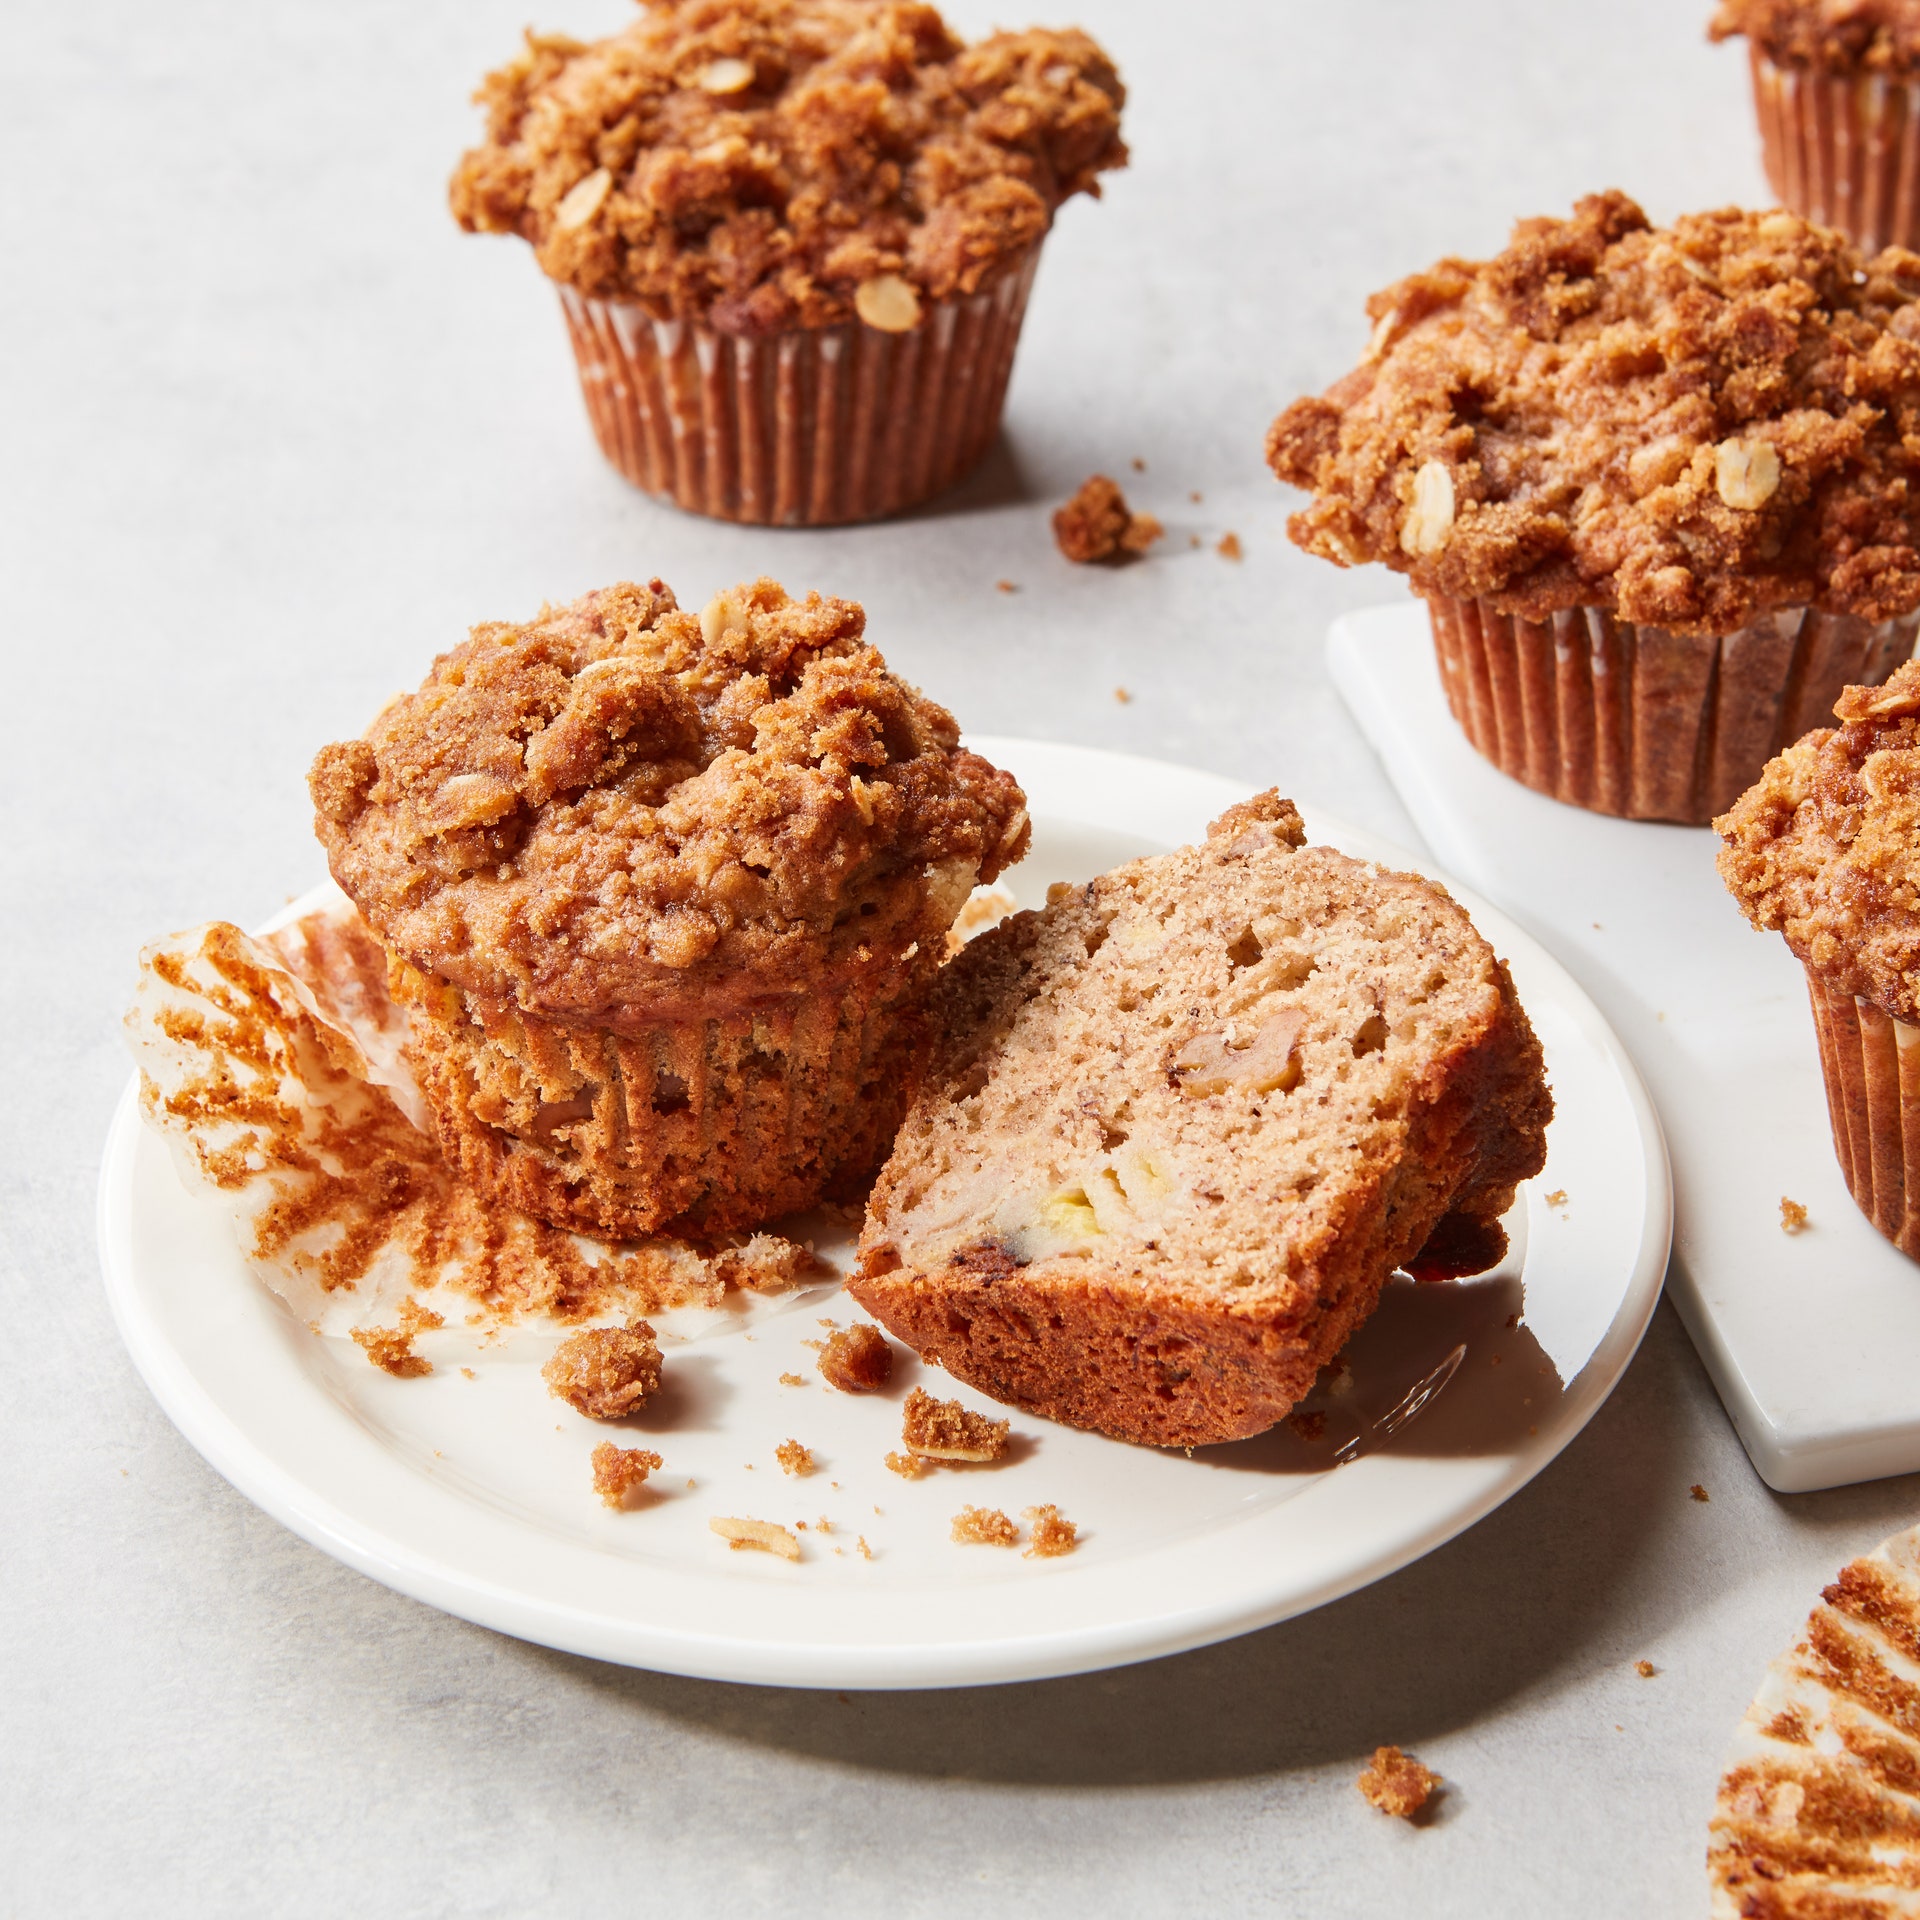 A plate of banana nut muffins with brown sugar streusel being sliced in half.